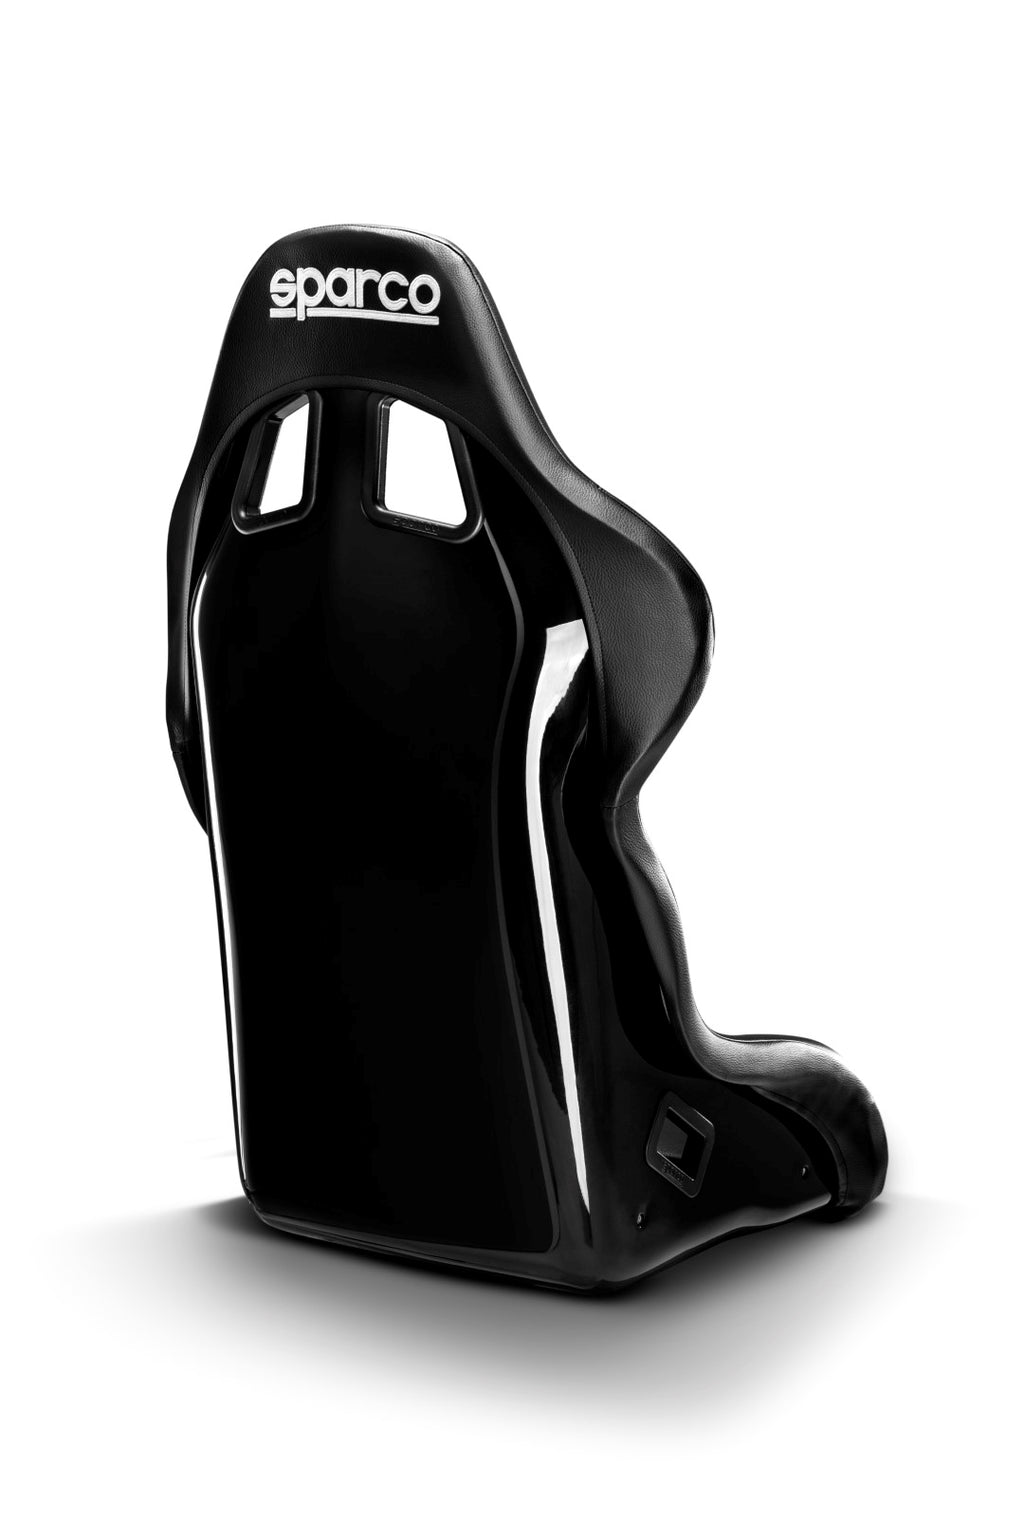 Sparco - EVO QRT Competition Seat